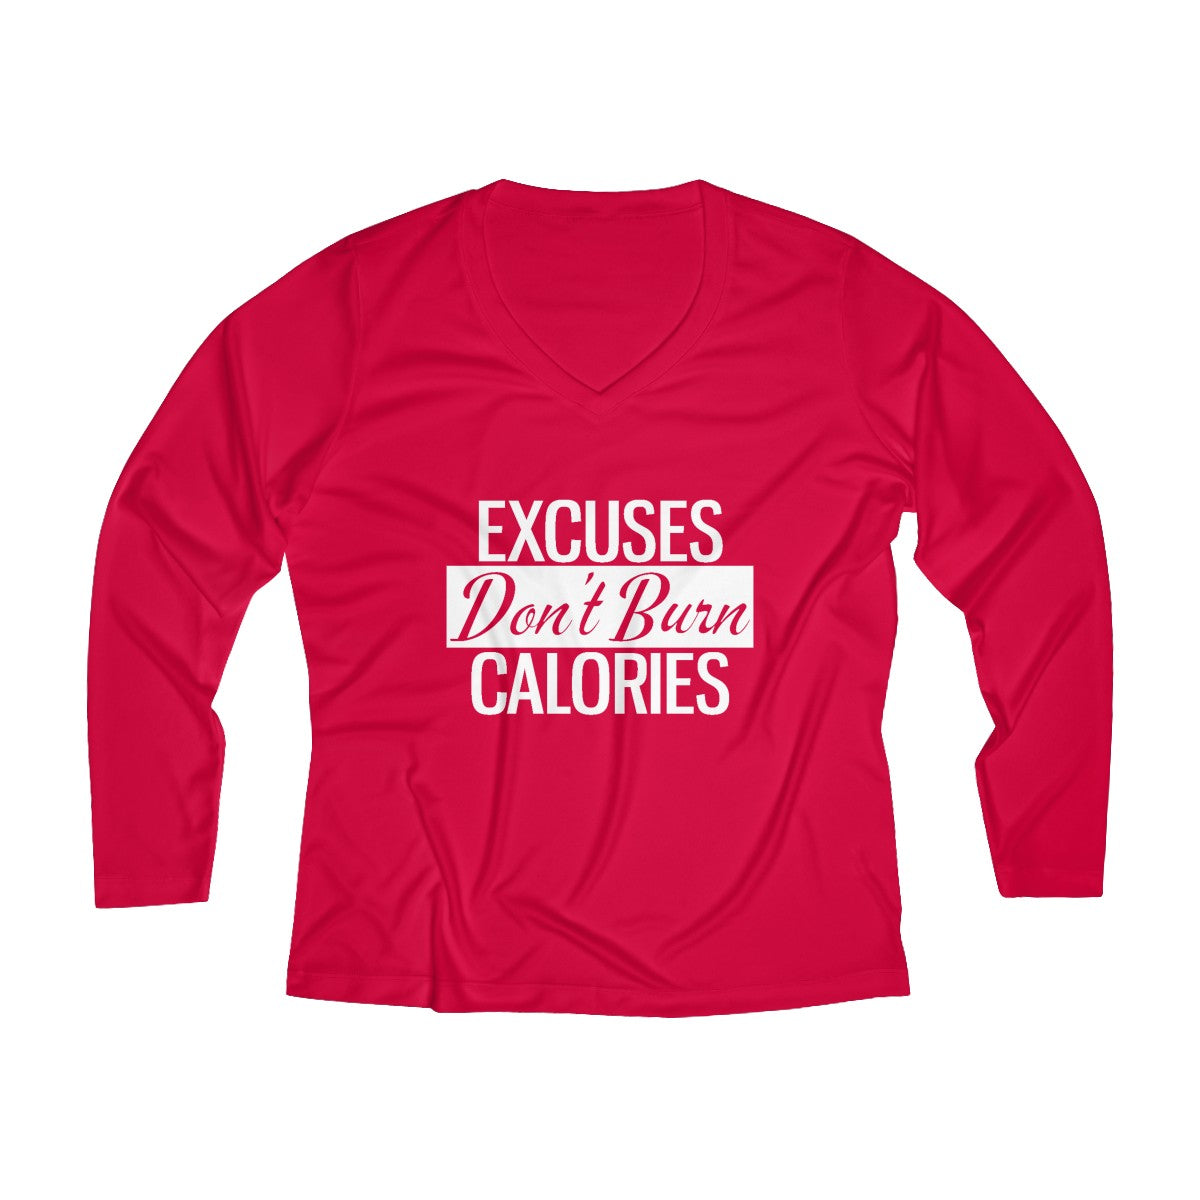 Excuses Don't Burn Calories | Women's Long Sleeve Performance V-neck Tee